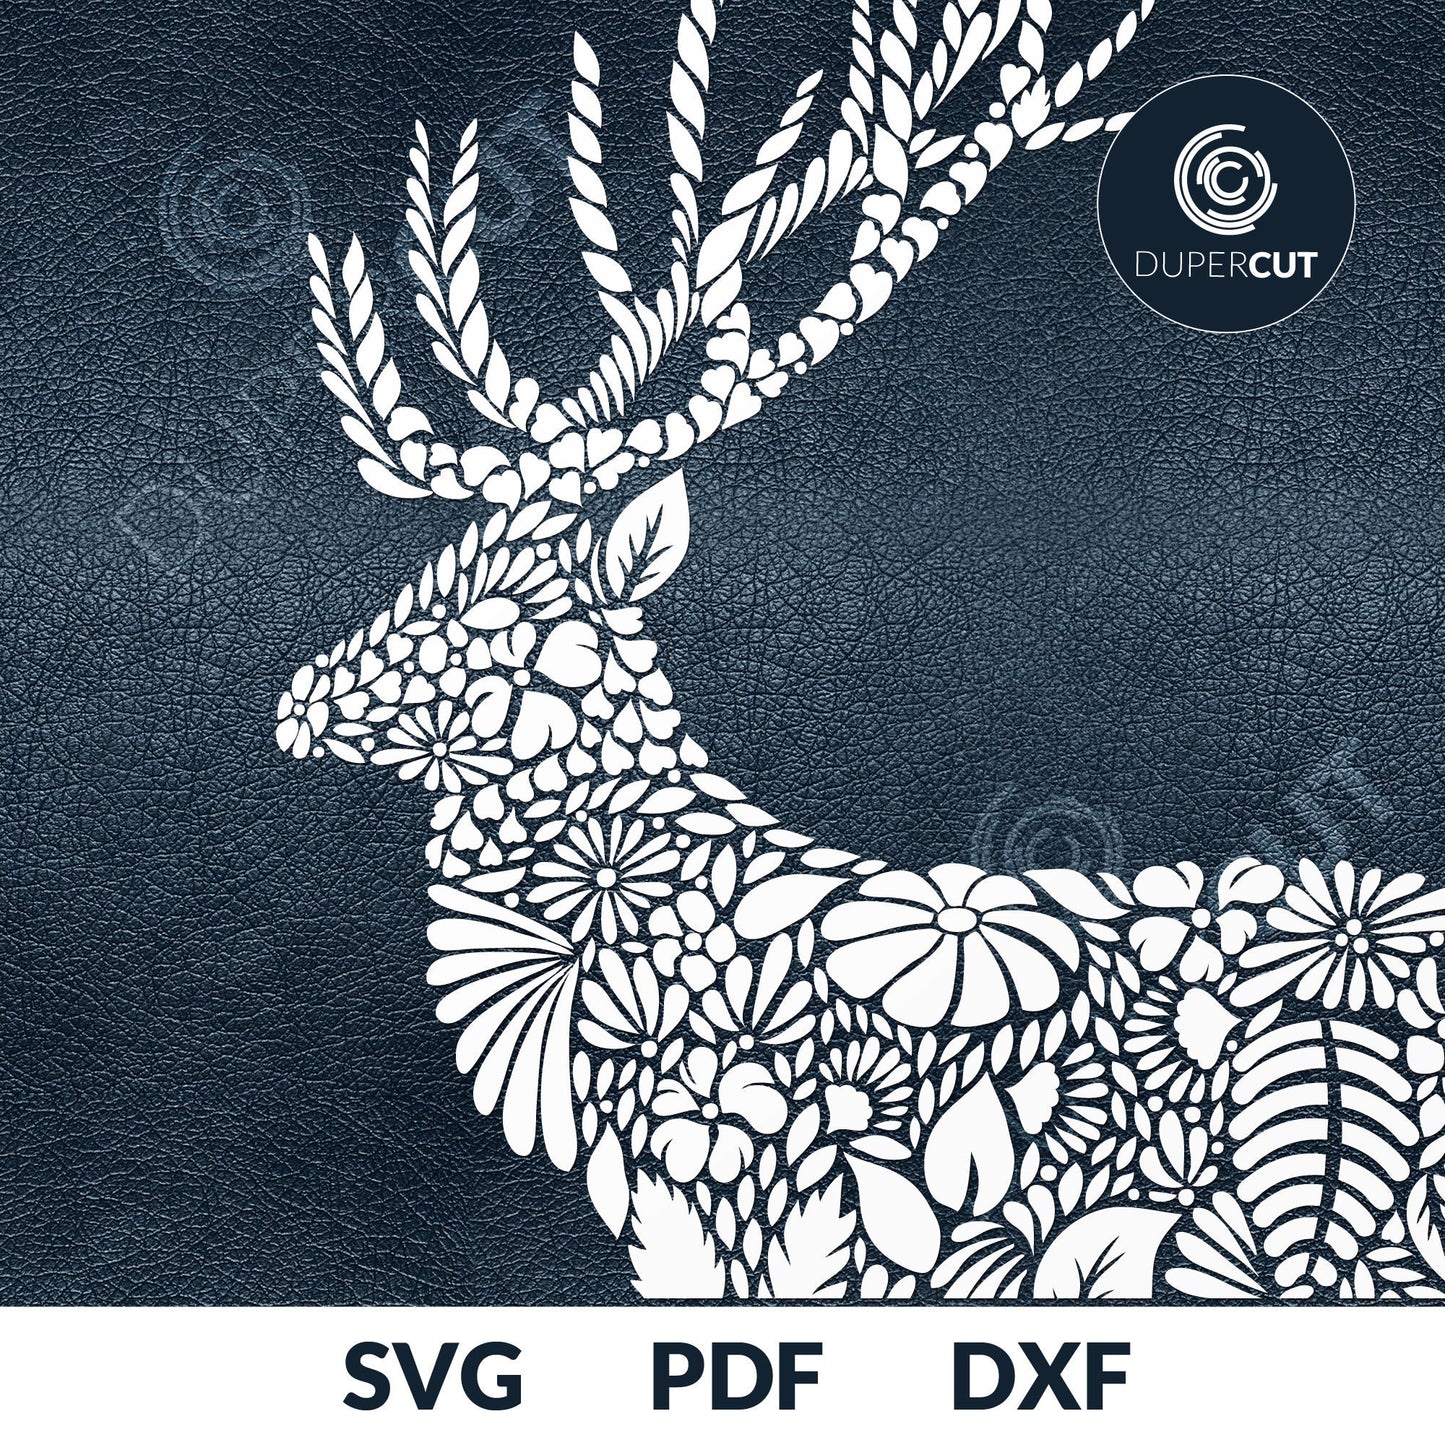 Zentangle deer vinyl cutting template  - SVG DXF JPEG files for CNC machines, laser cutting, Cricut, Silhouette Cameo, Glowforge engraving